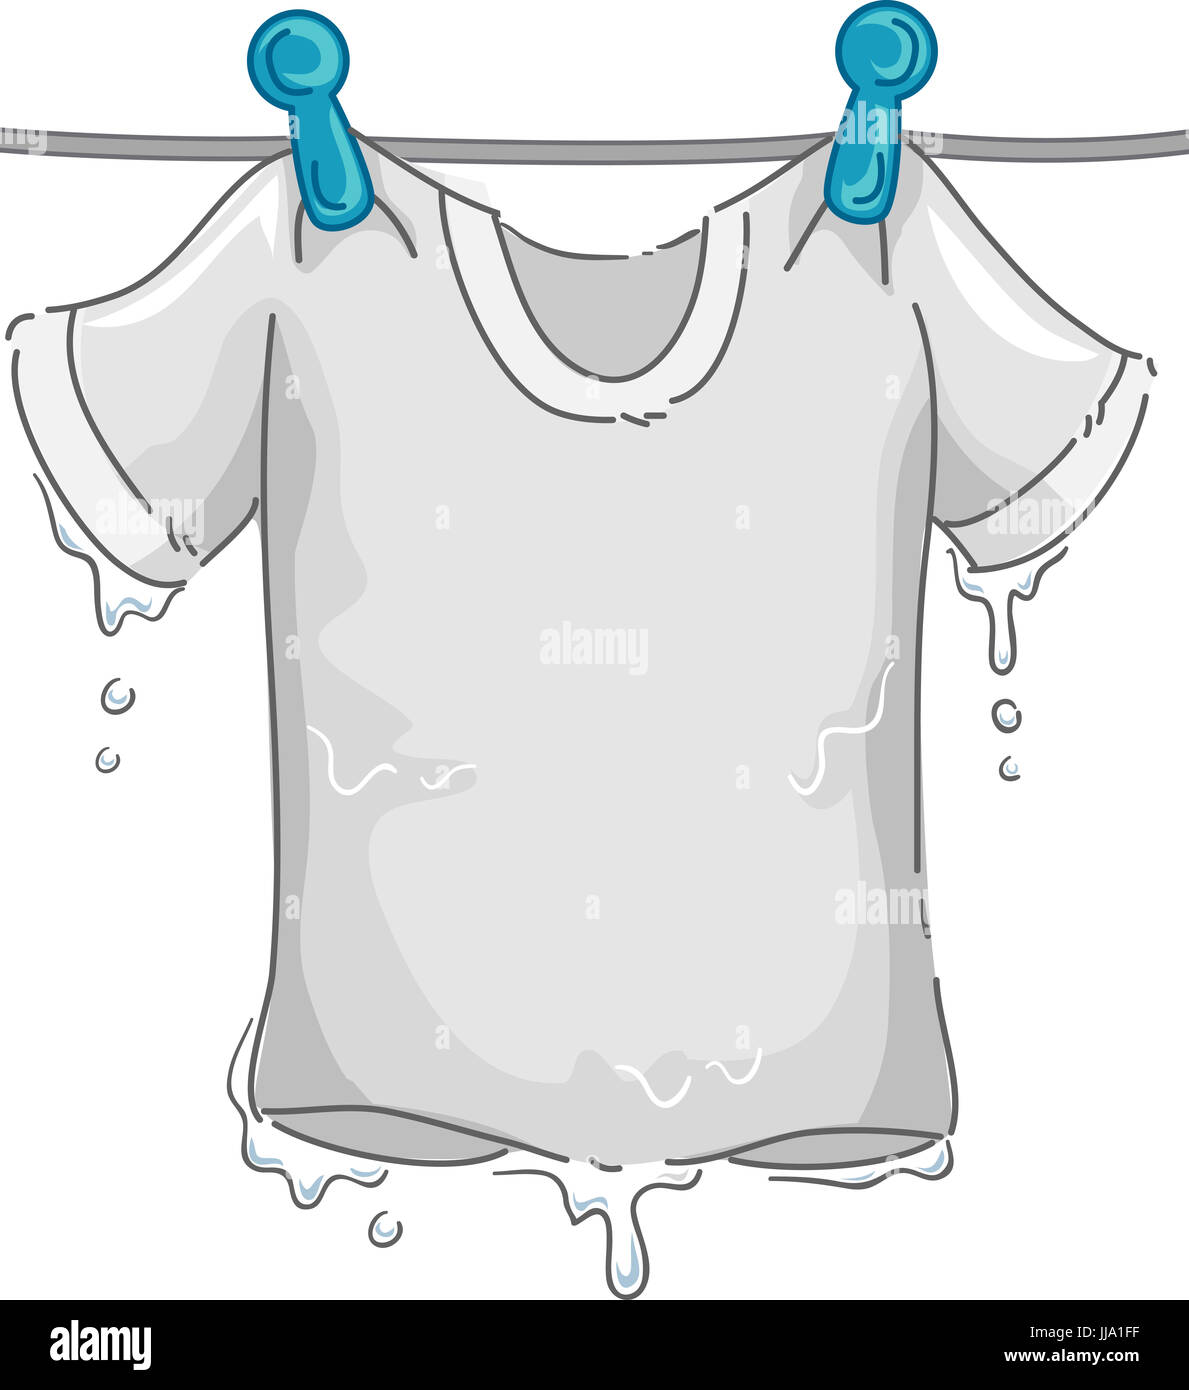 Illustration of a Dripping White T-shirt Hanging From the Clothesline as it Dries Stock Photo